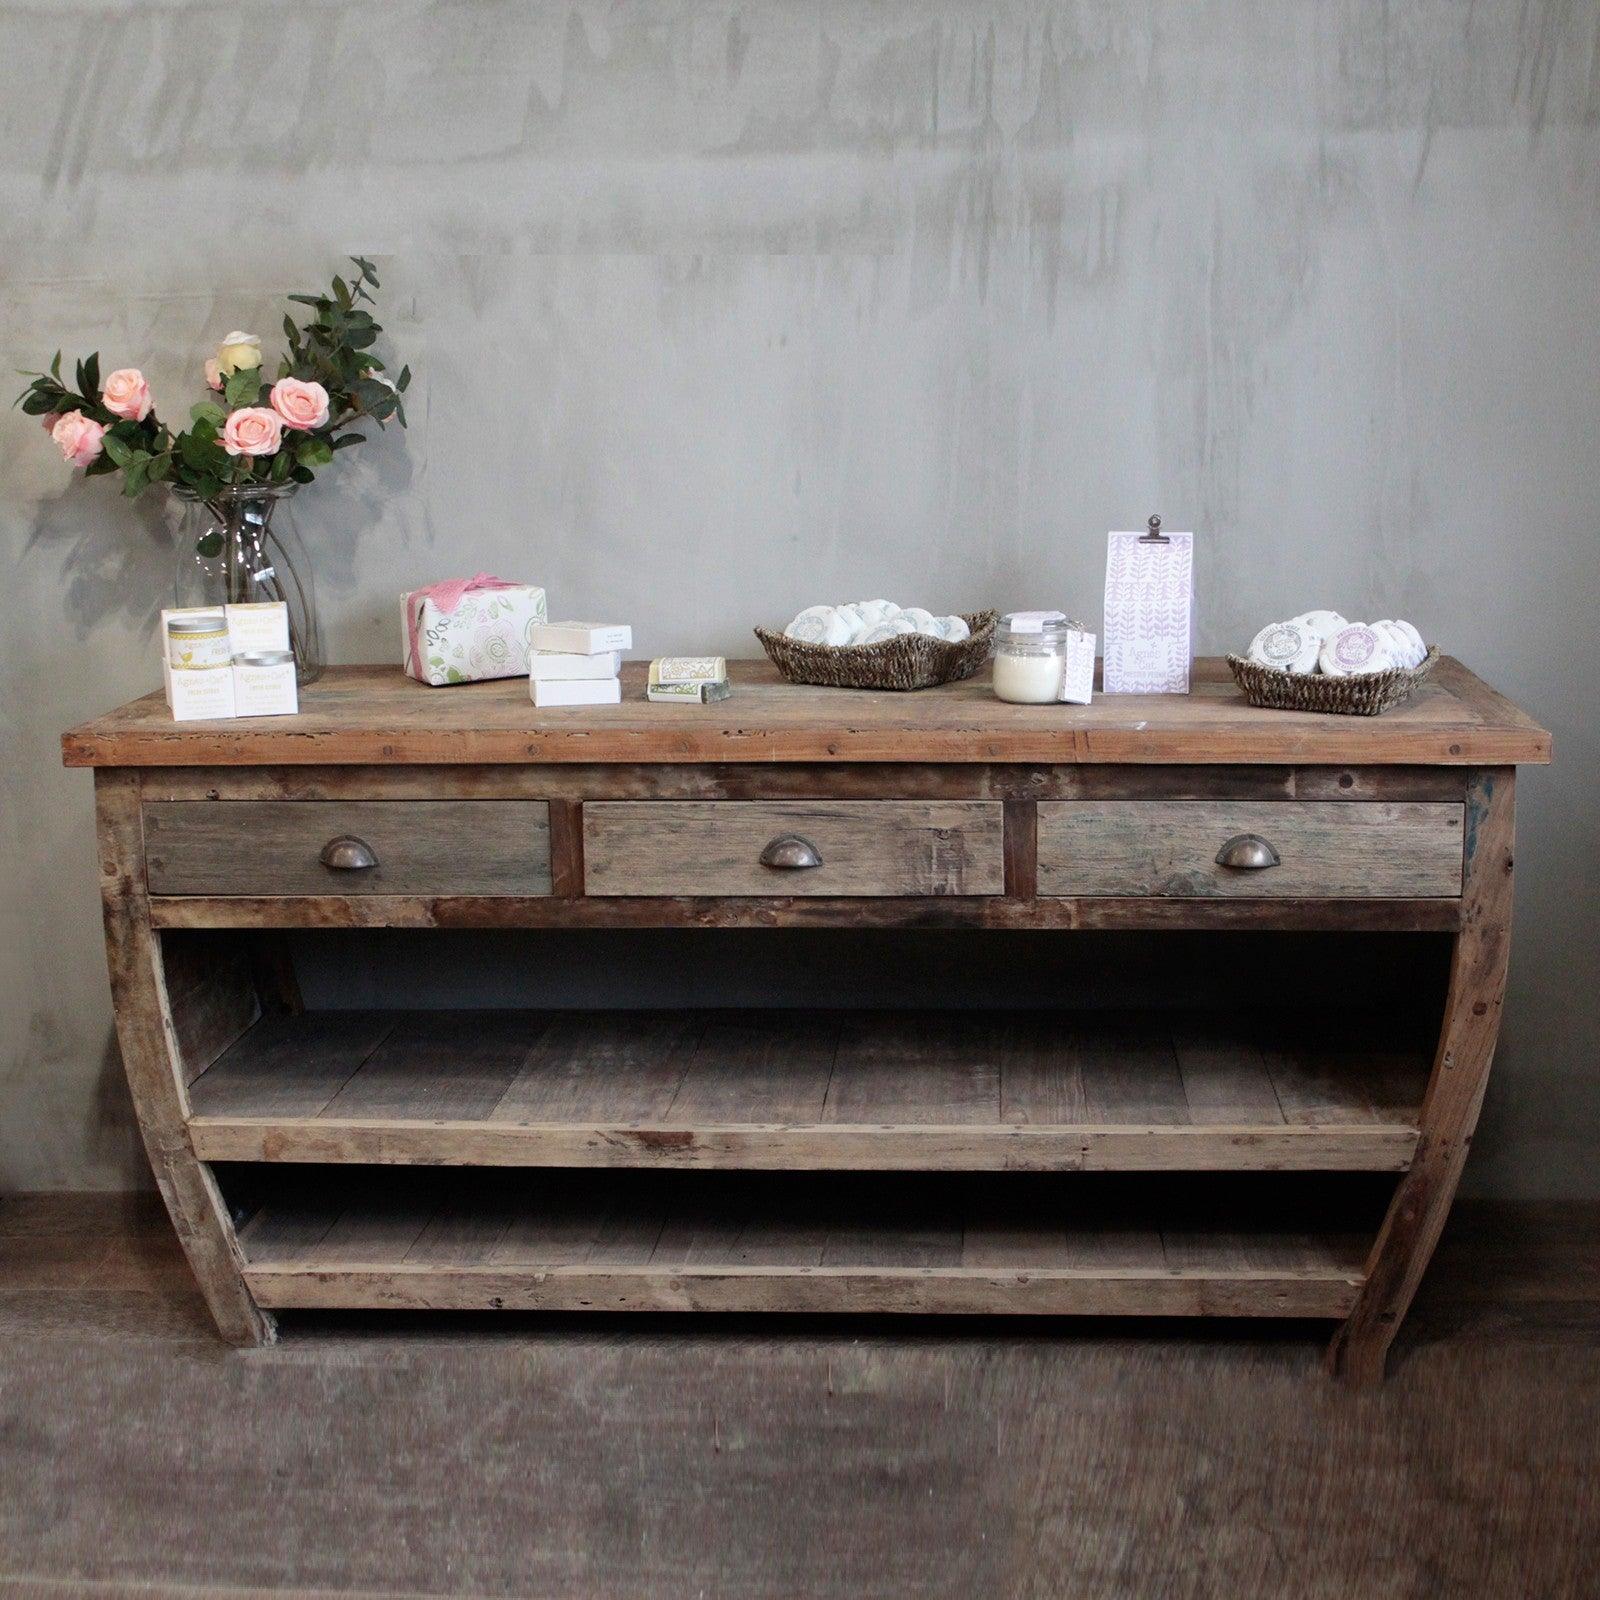 Centerpiece Reclaimed Wood Table - 180x60x80cm - Charming Spaces